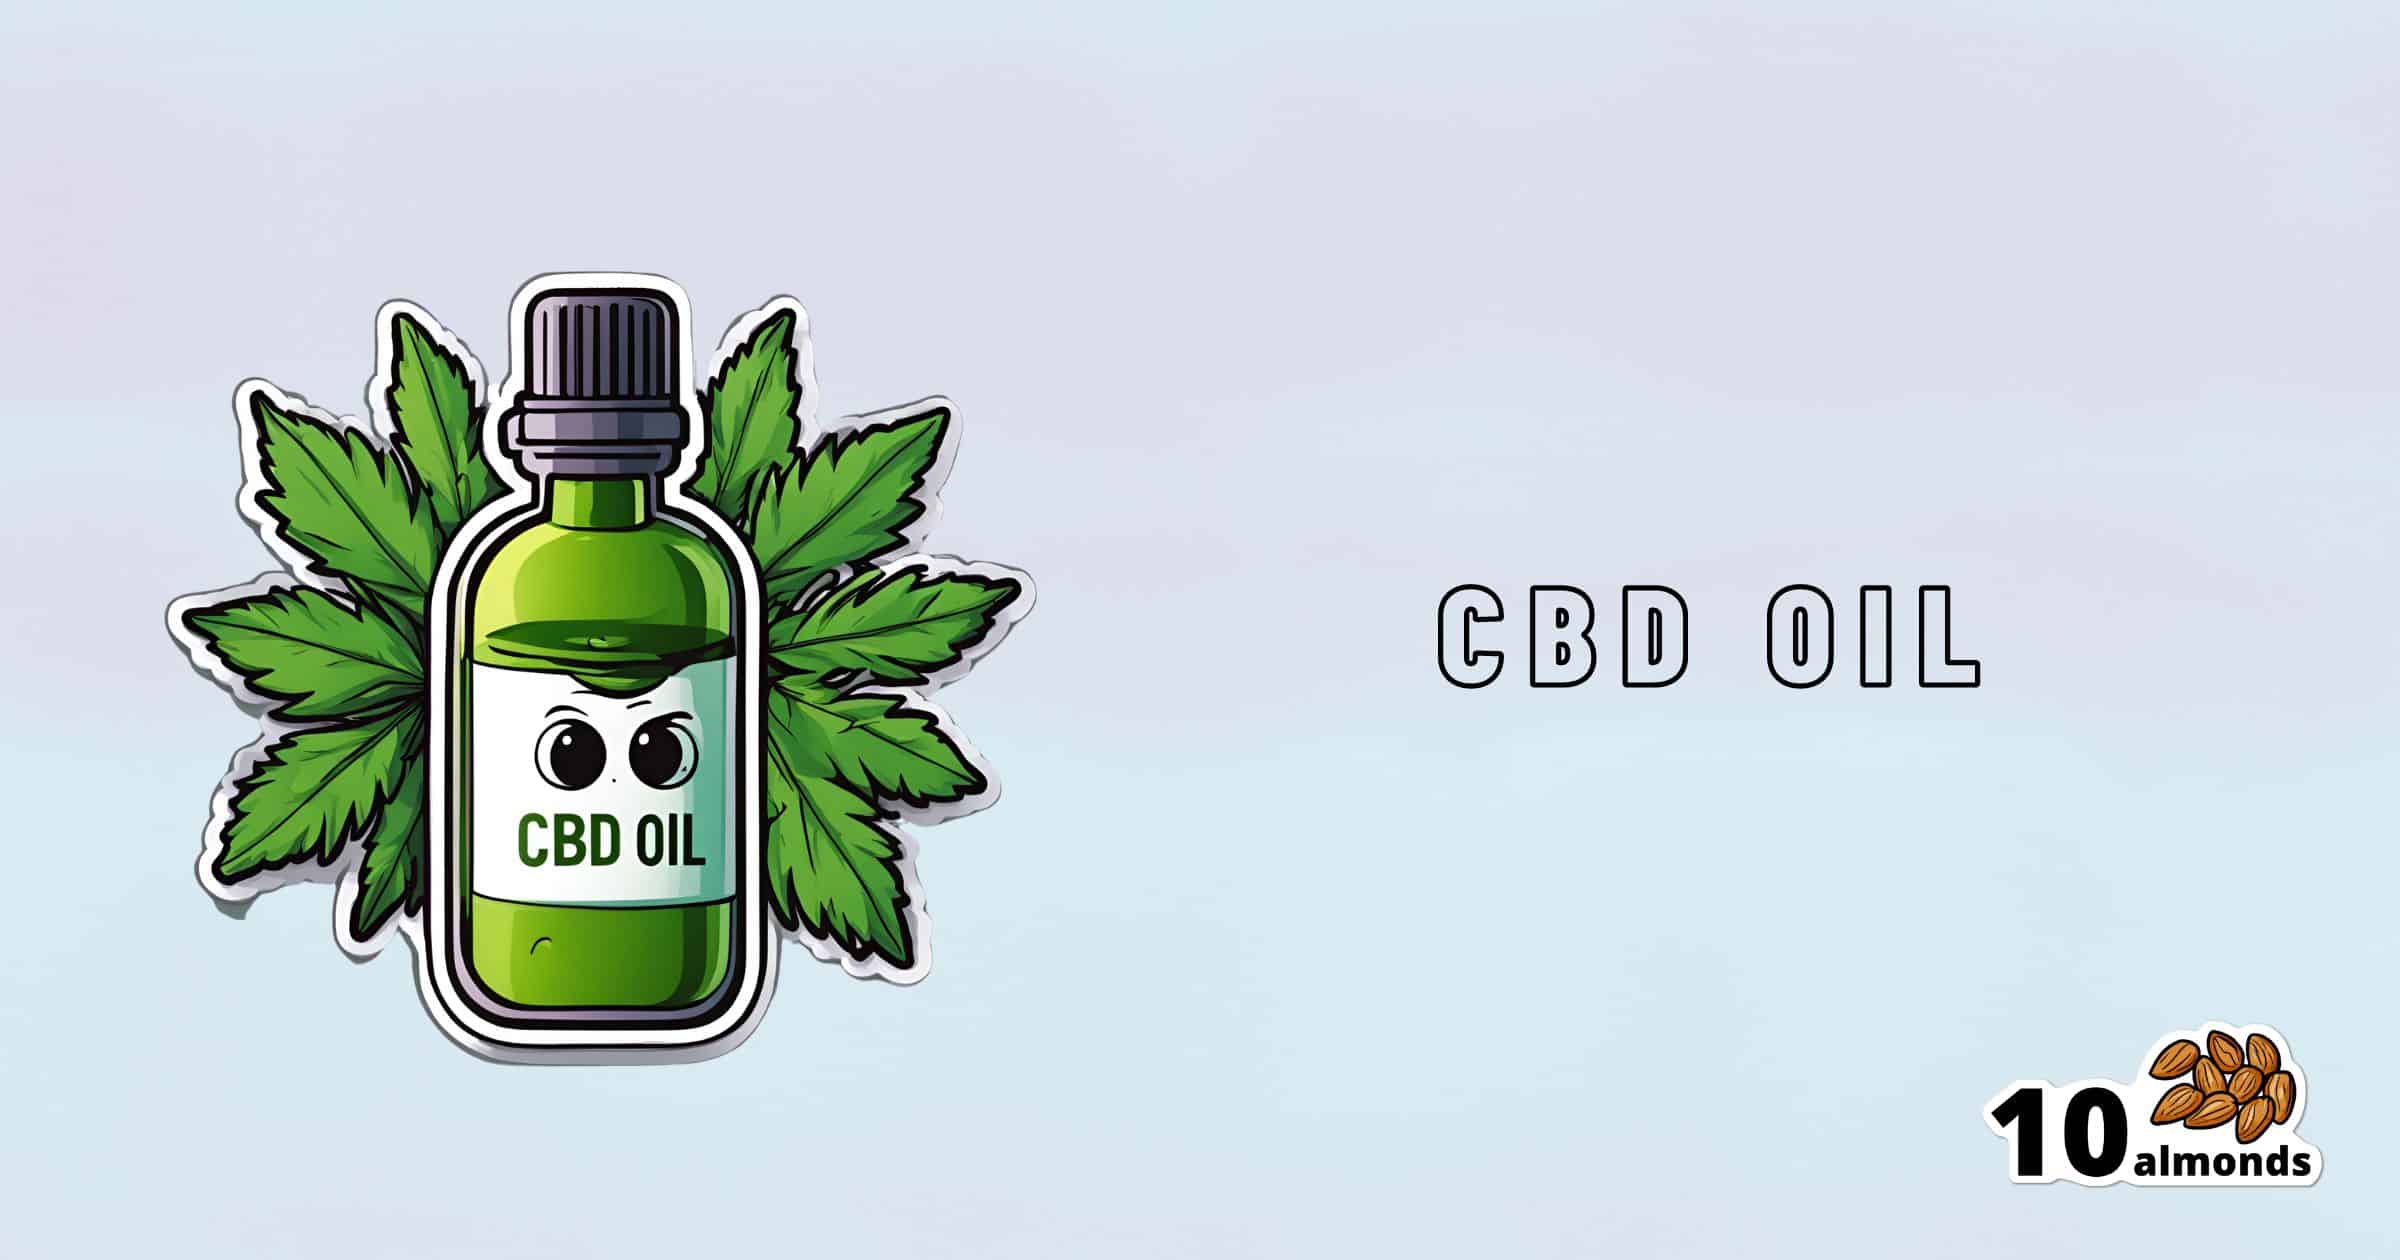 A drawing of a green bottle labeled "CBD Oil" with a pair of angry eyes on it. The bottle is surrounded by hemp leaves. To the right, the text "CBD OIL" is written. In the bottom right corner, there is an illustration of ten almonds with the text "10 almonds.